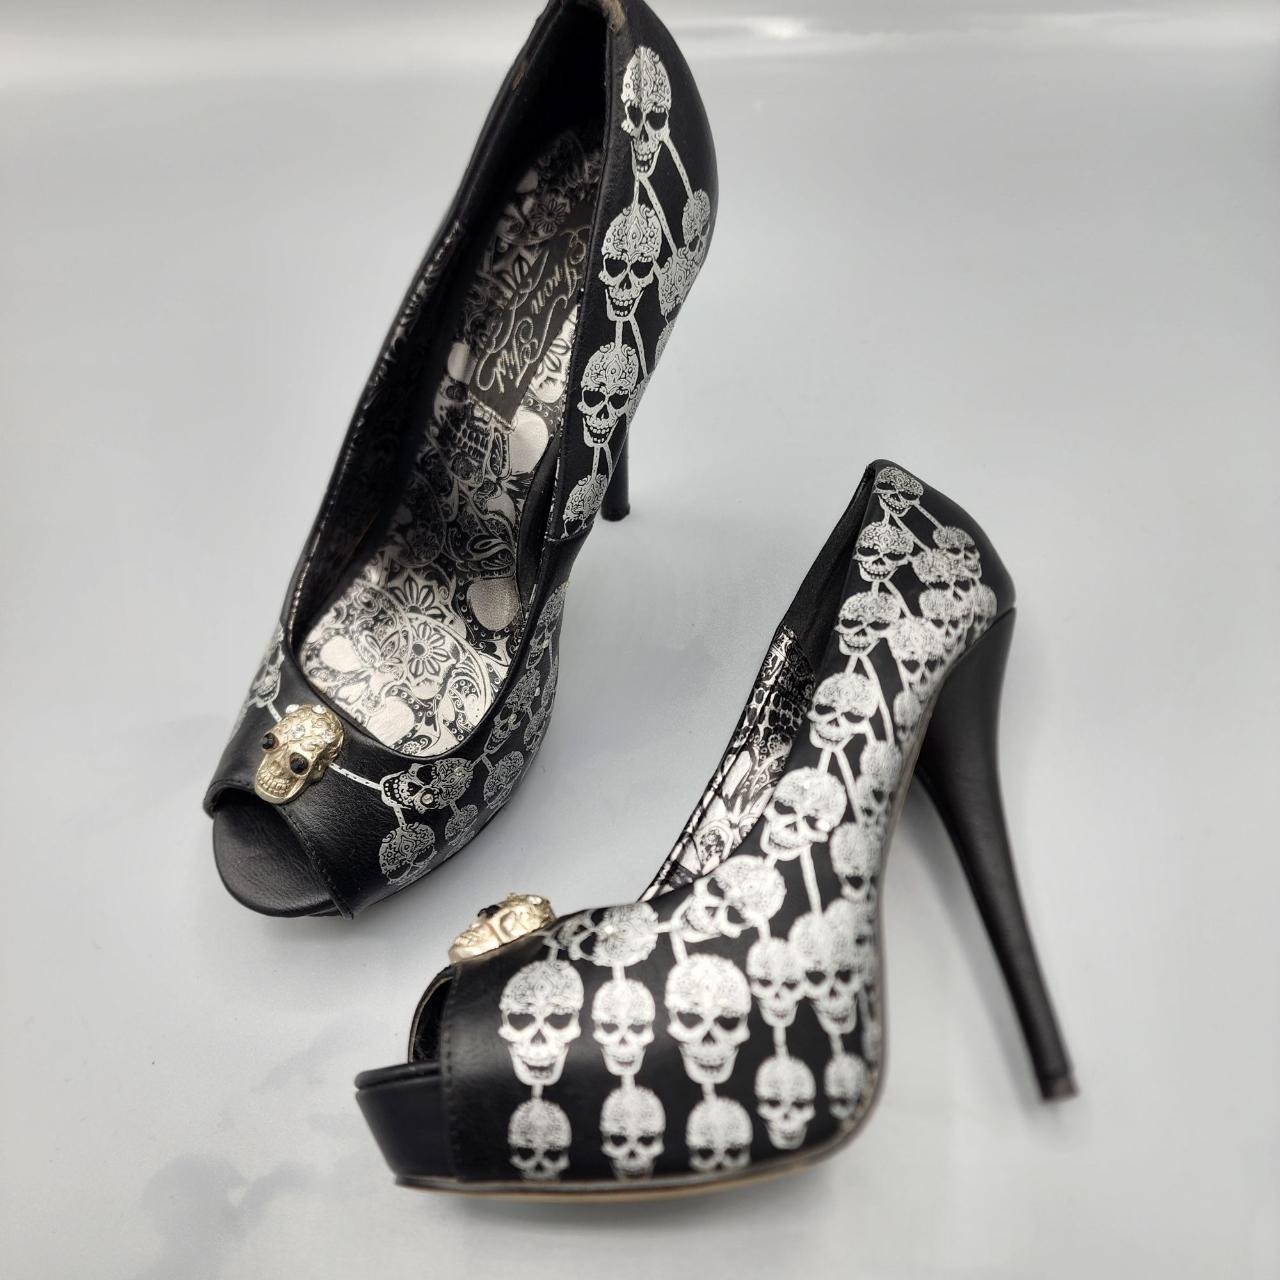 Iron Fist Women's Black and Silver Courts